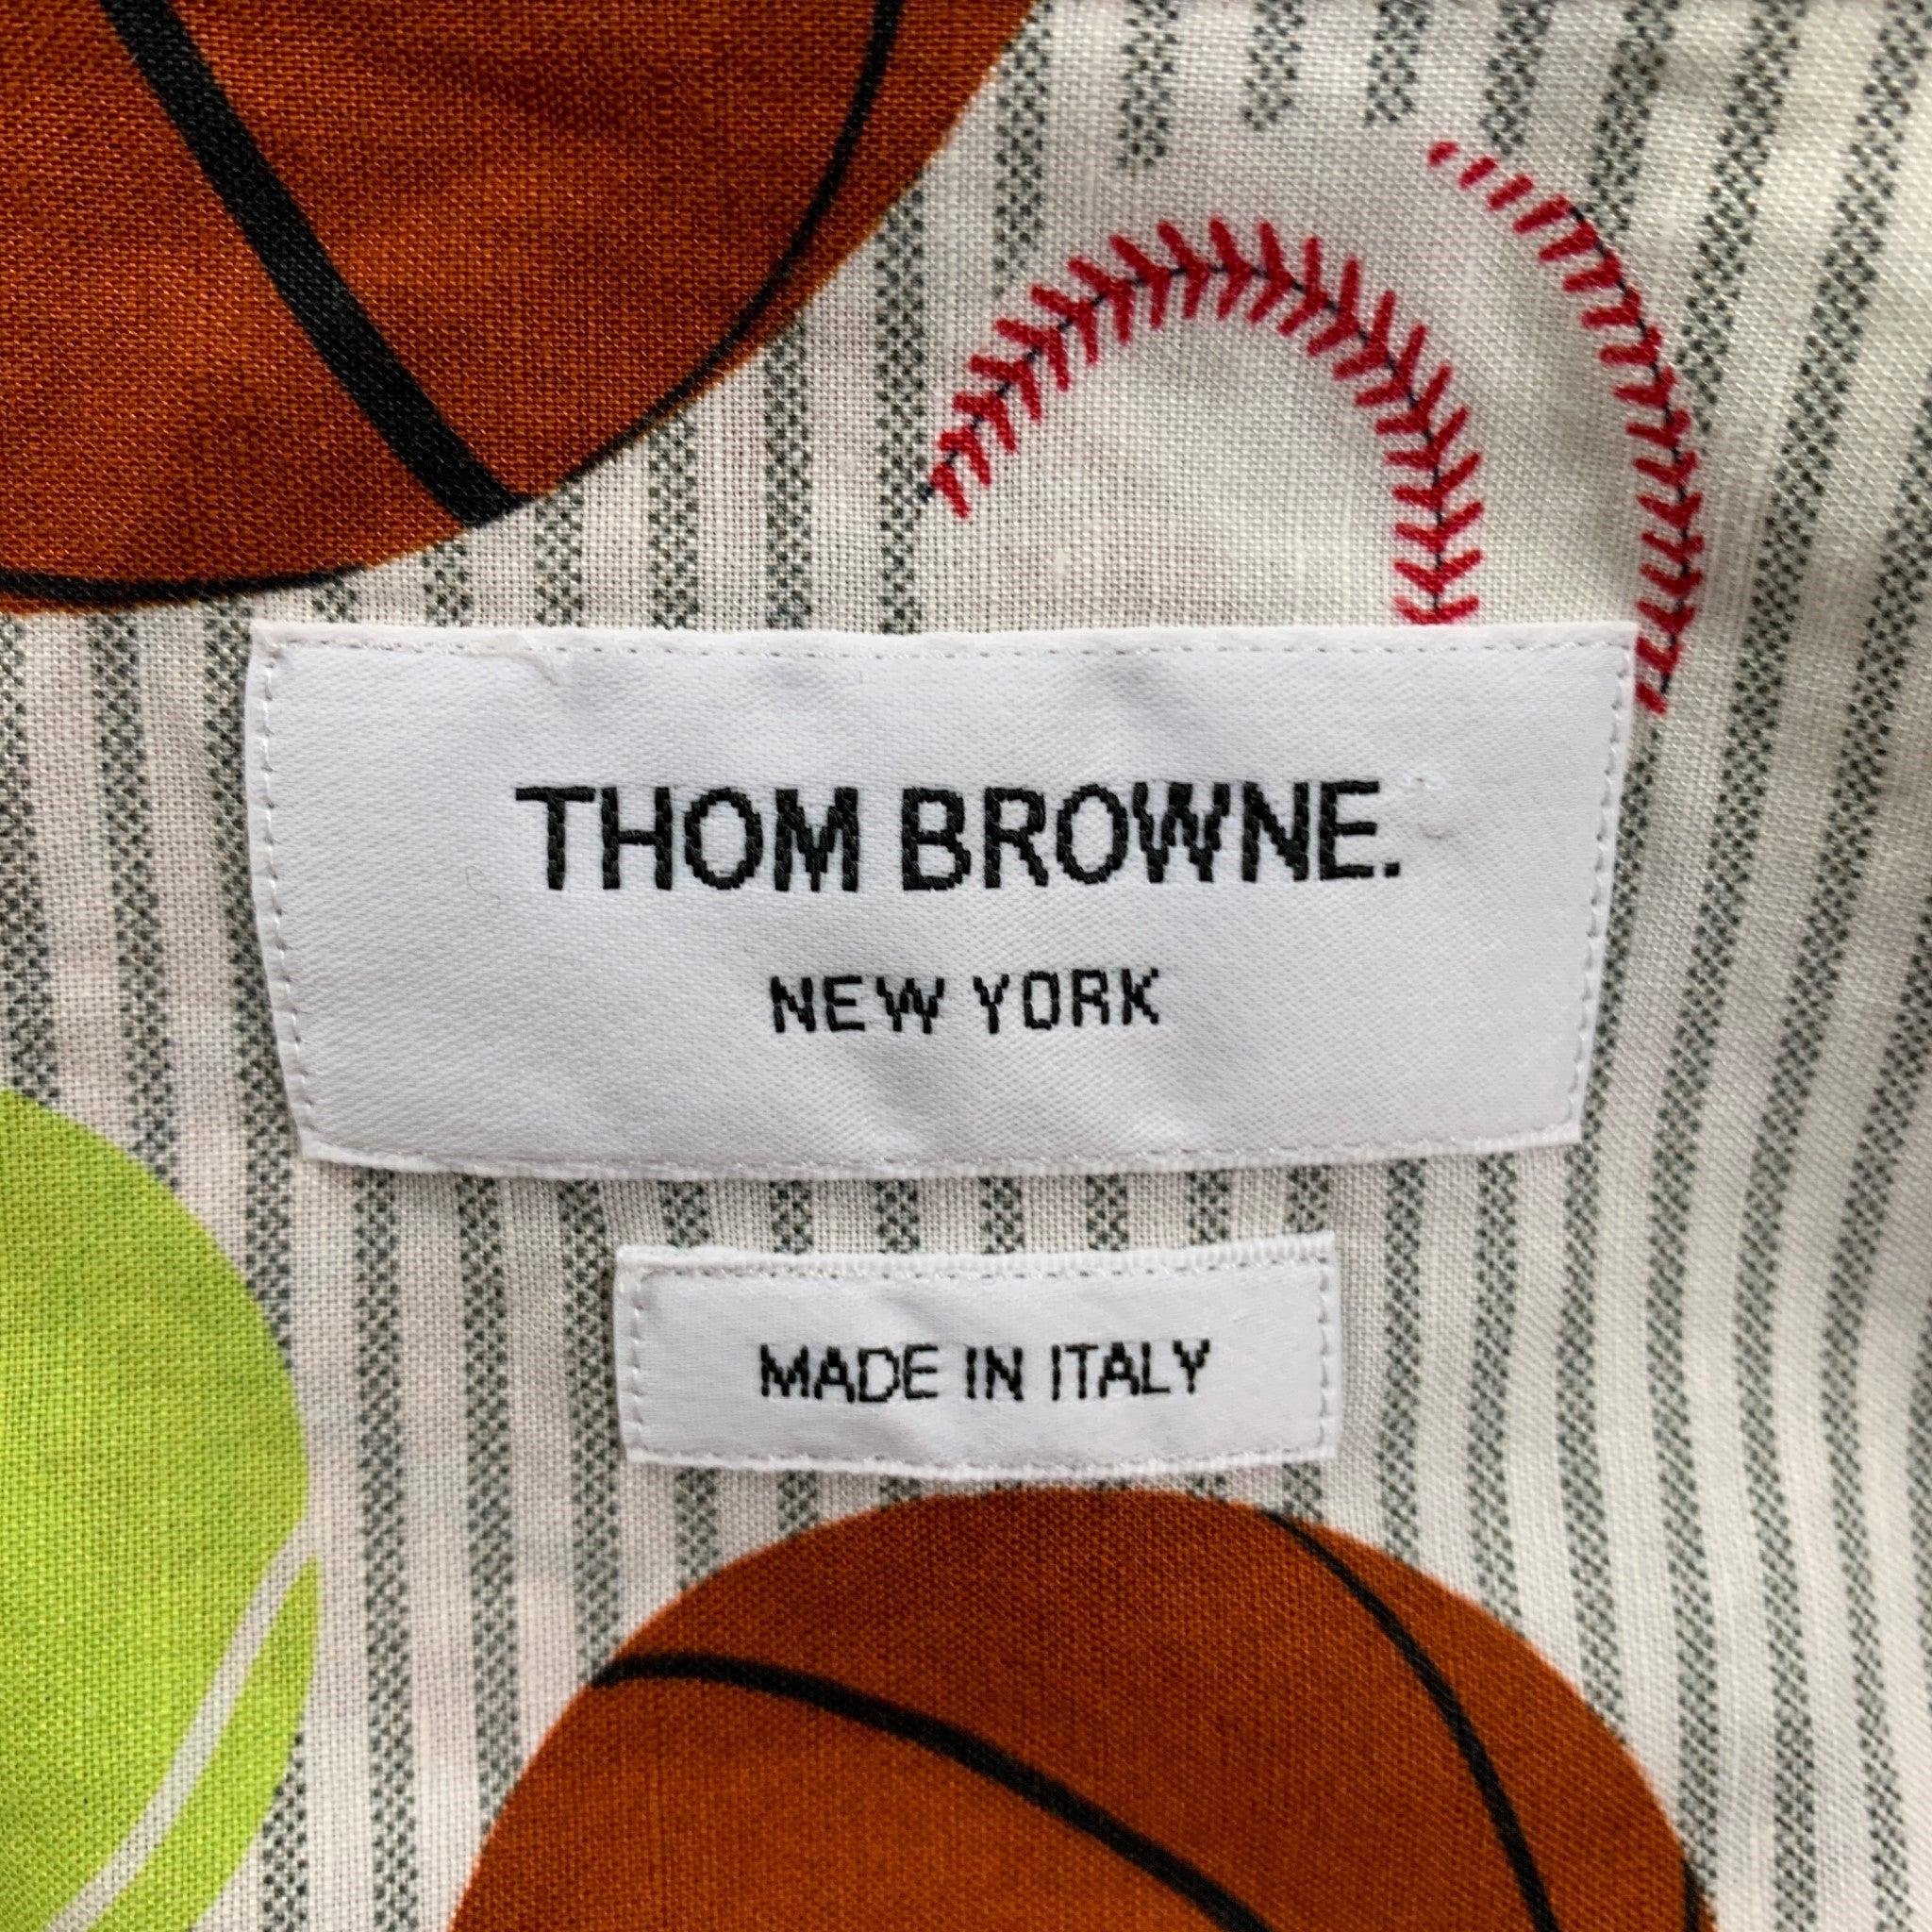 THOM BROWNE SS 20 Size M Multi-Color Cotton Blend Button Up Short Sleeve Shirt For Sale 1